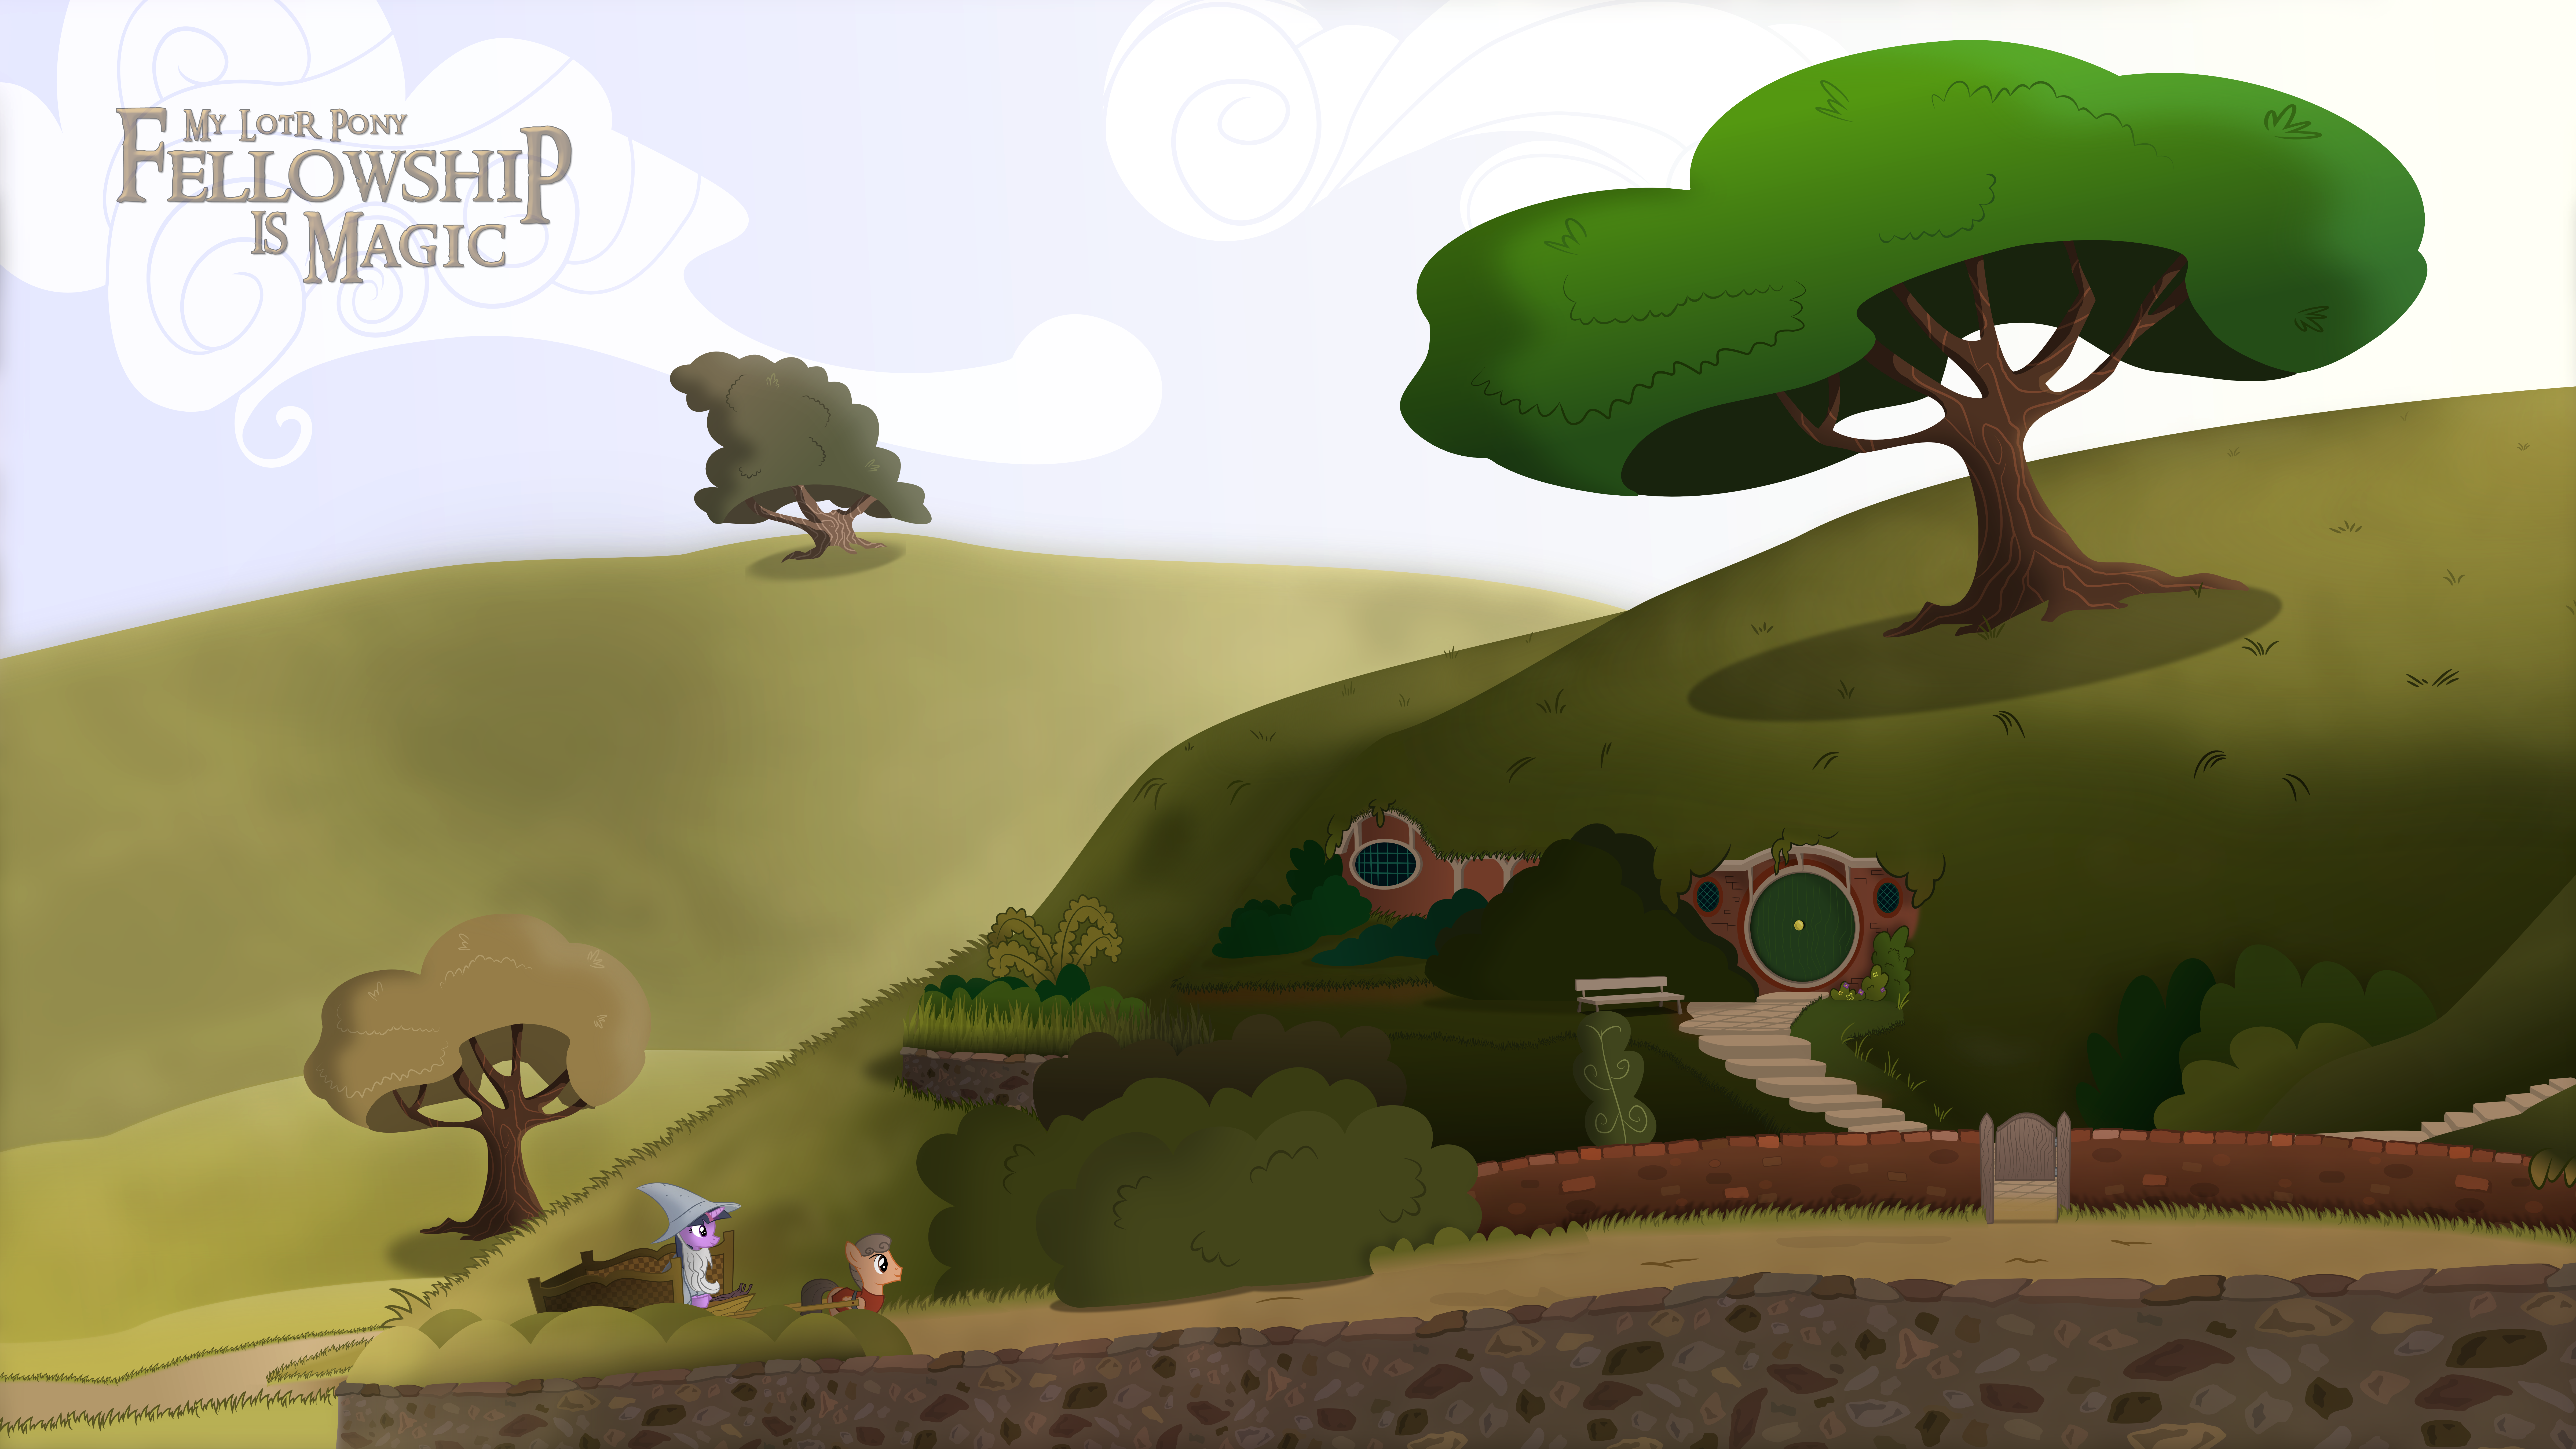 The Shire: Bag End by shadowdark3